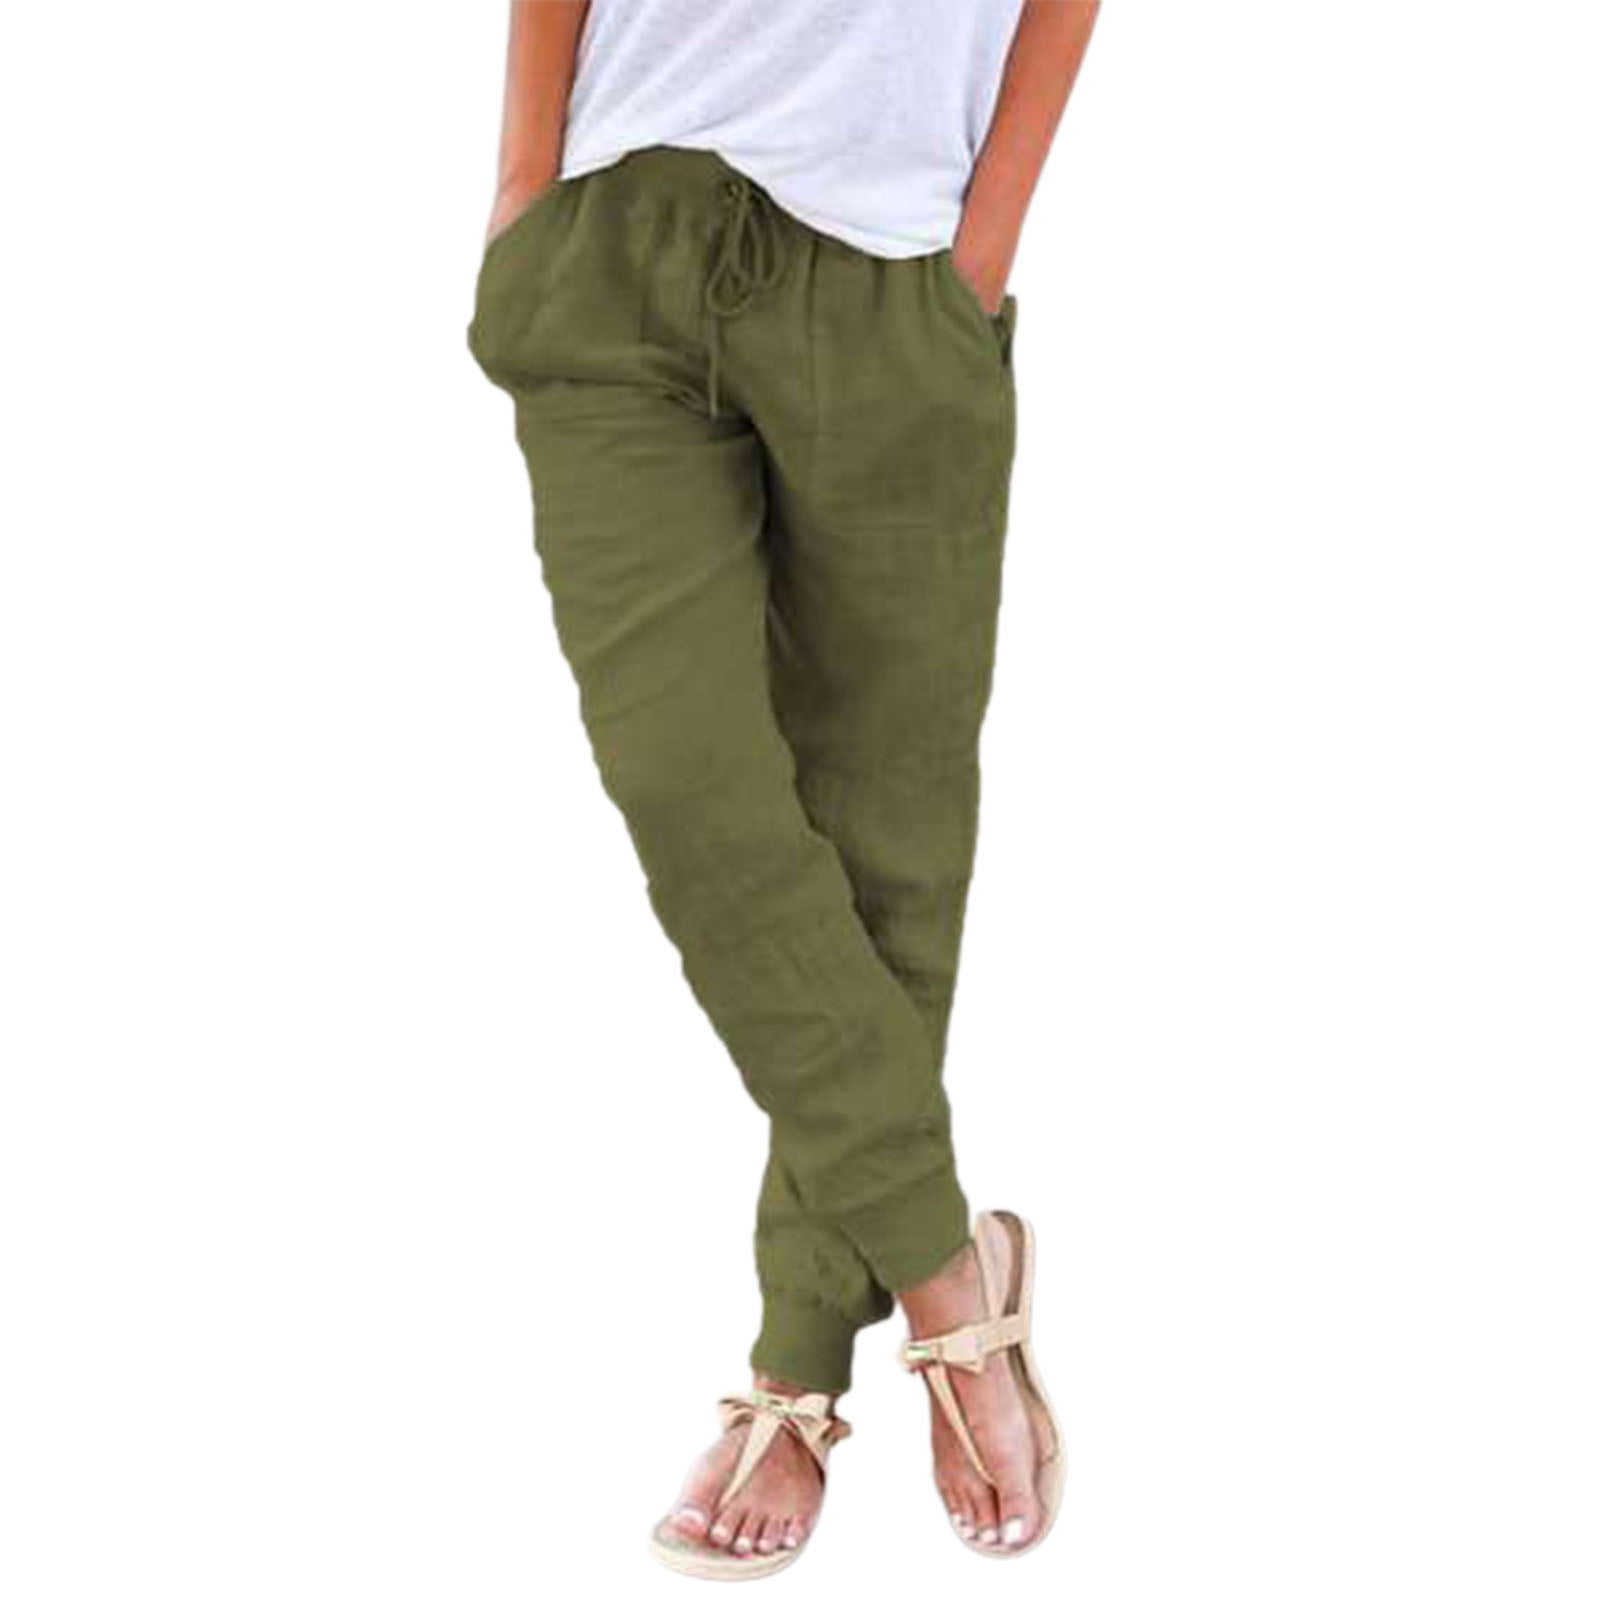 Men's Casual Pencil Pants Classic Fit Elastic Waist Drawstring Solid Color Trousers with Pockets 